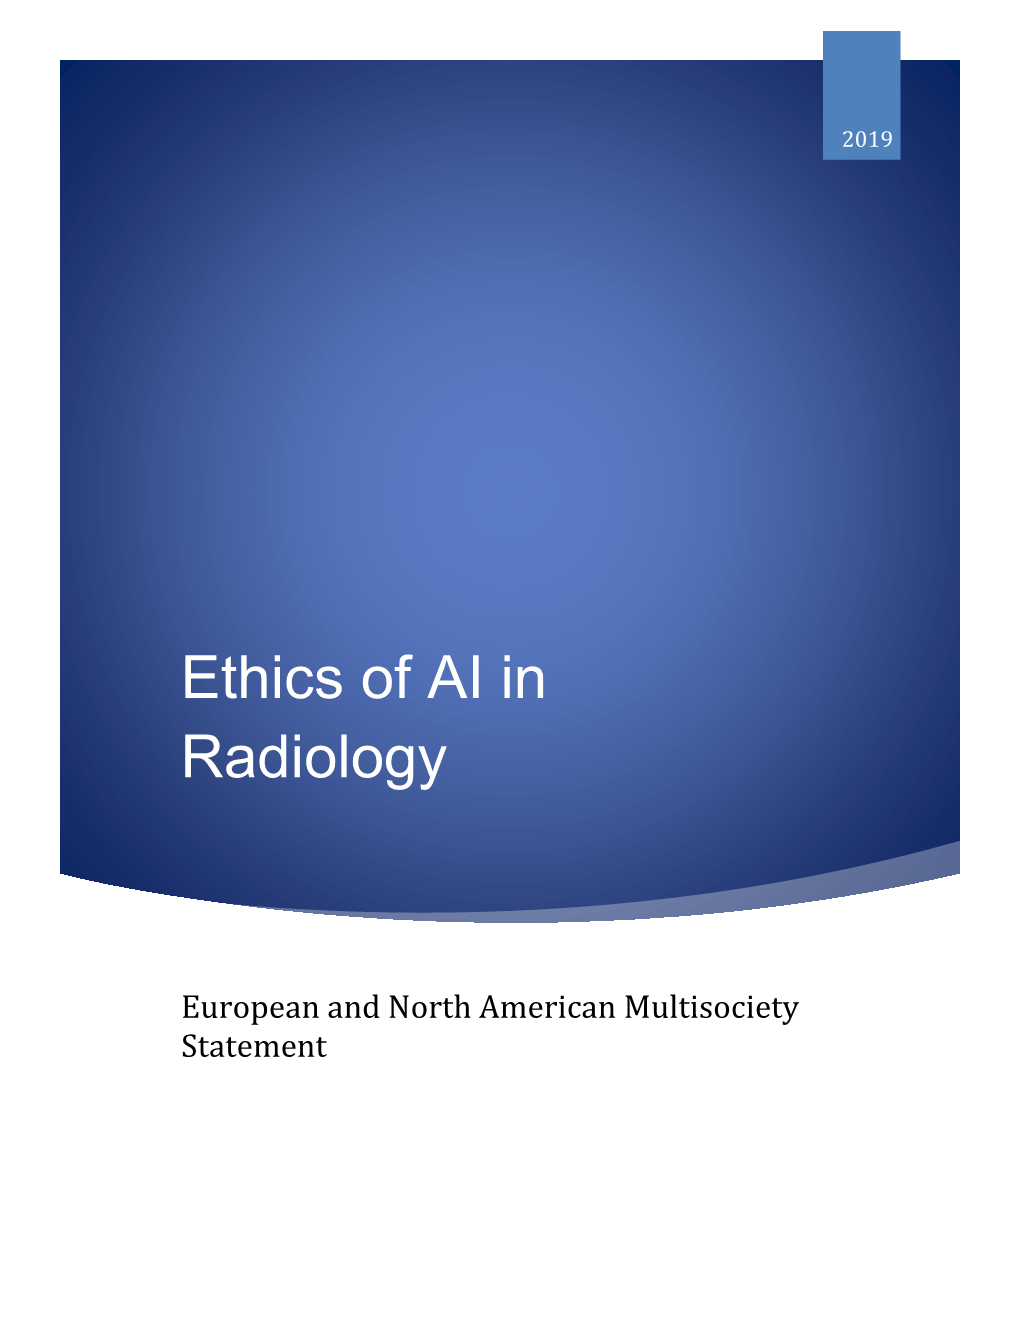 Ethics of AI in Radiology